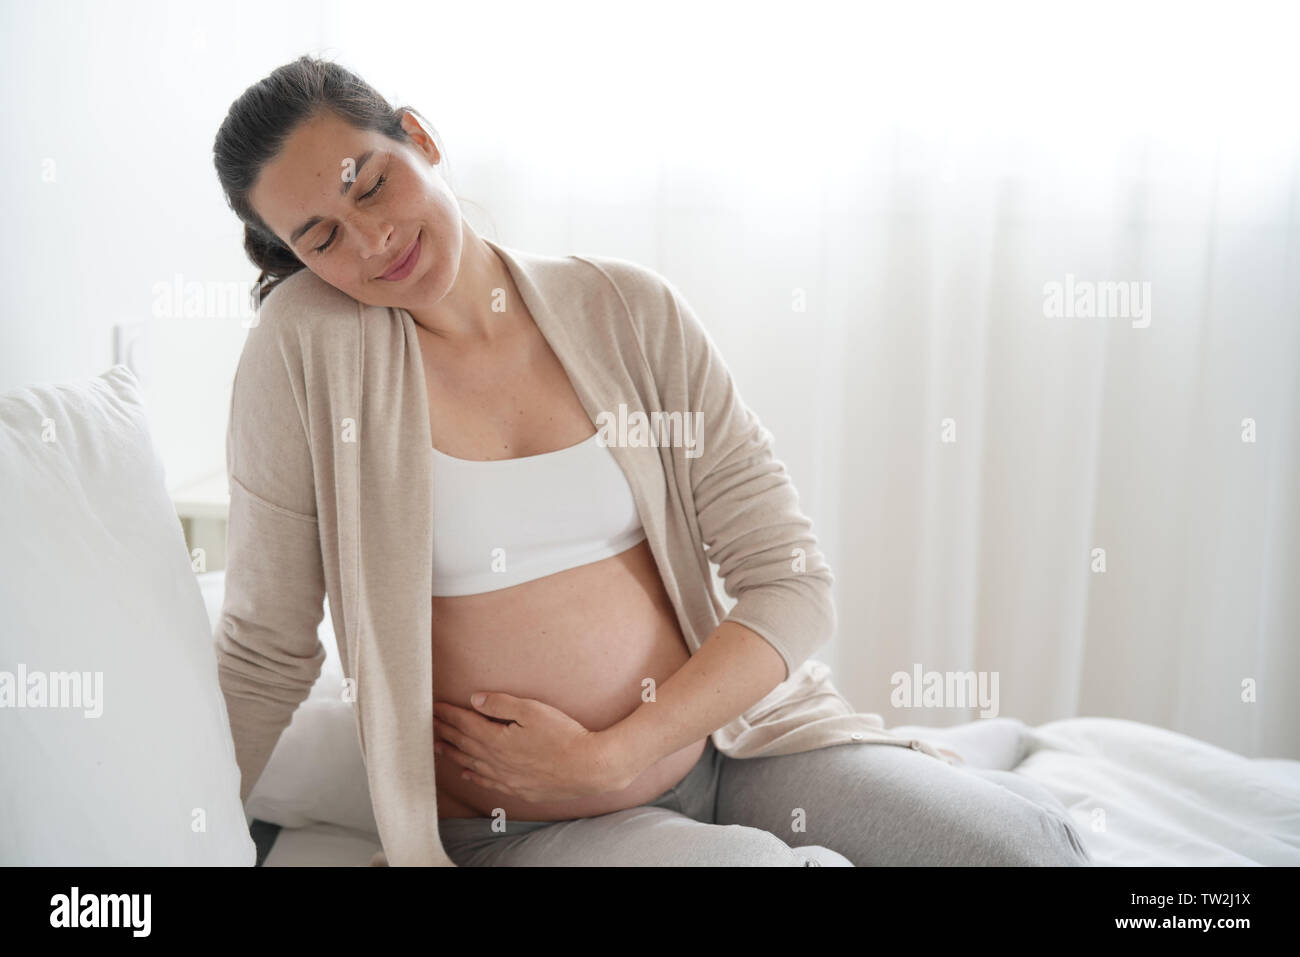 Portrait of pregnant woman relaxing on bed Stock Photo